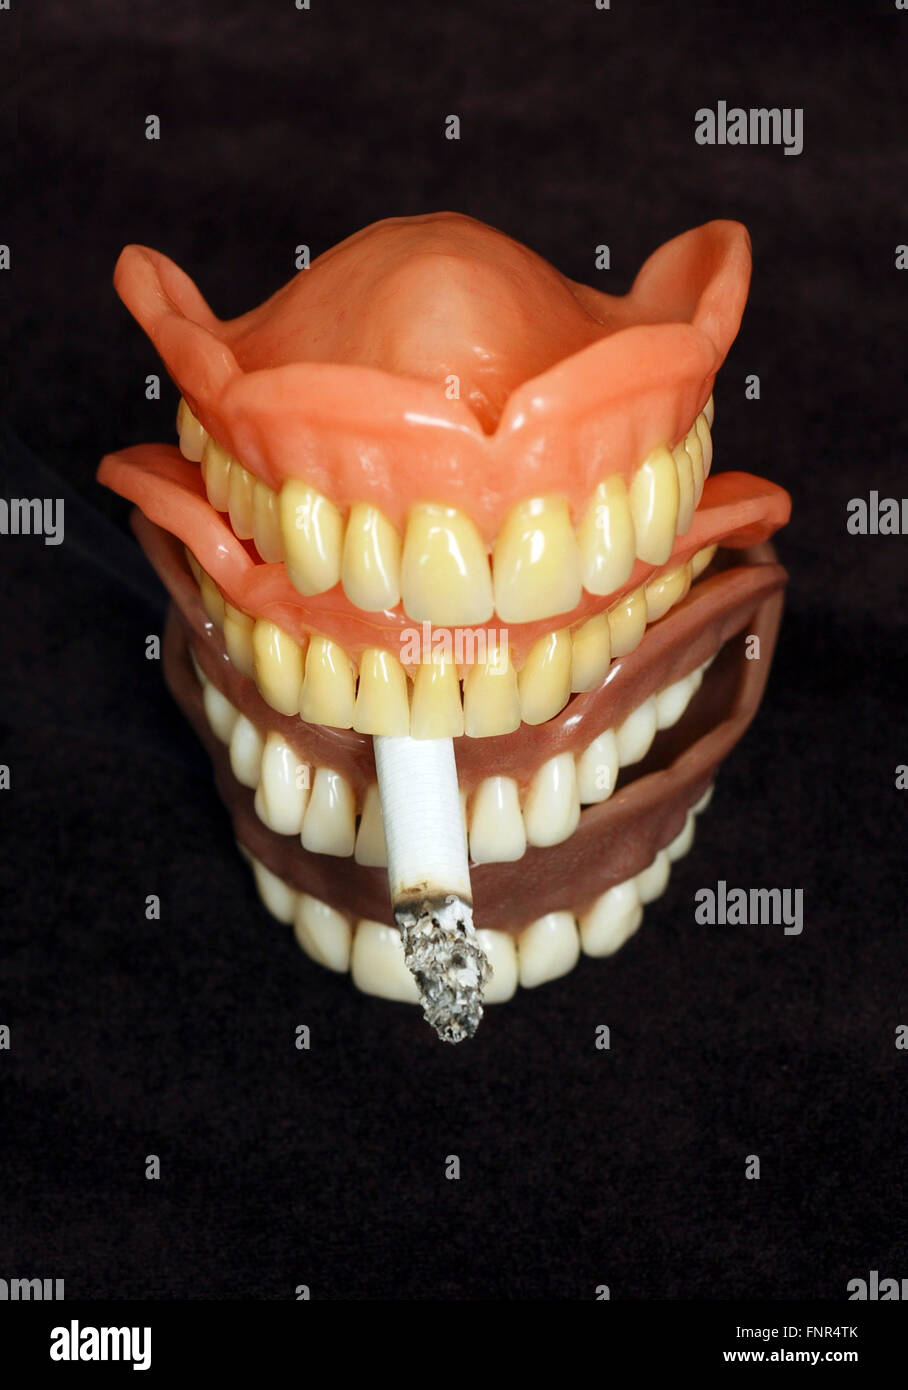 Four sets of dentures with a cigarette in between the teeth. Dentures or false teeth are made from an acrylic base. Stock Photo